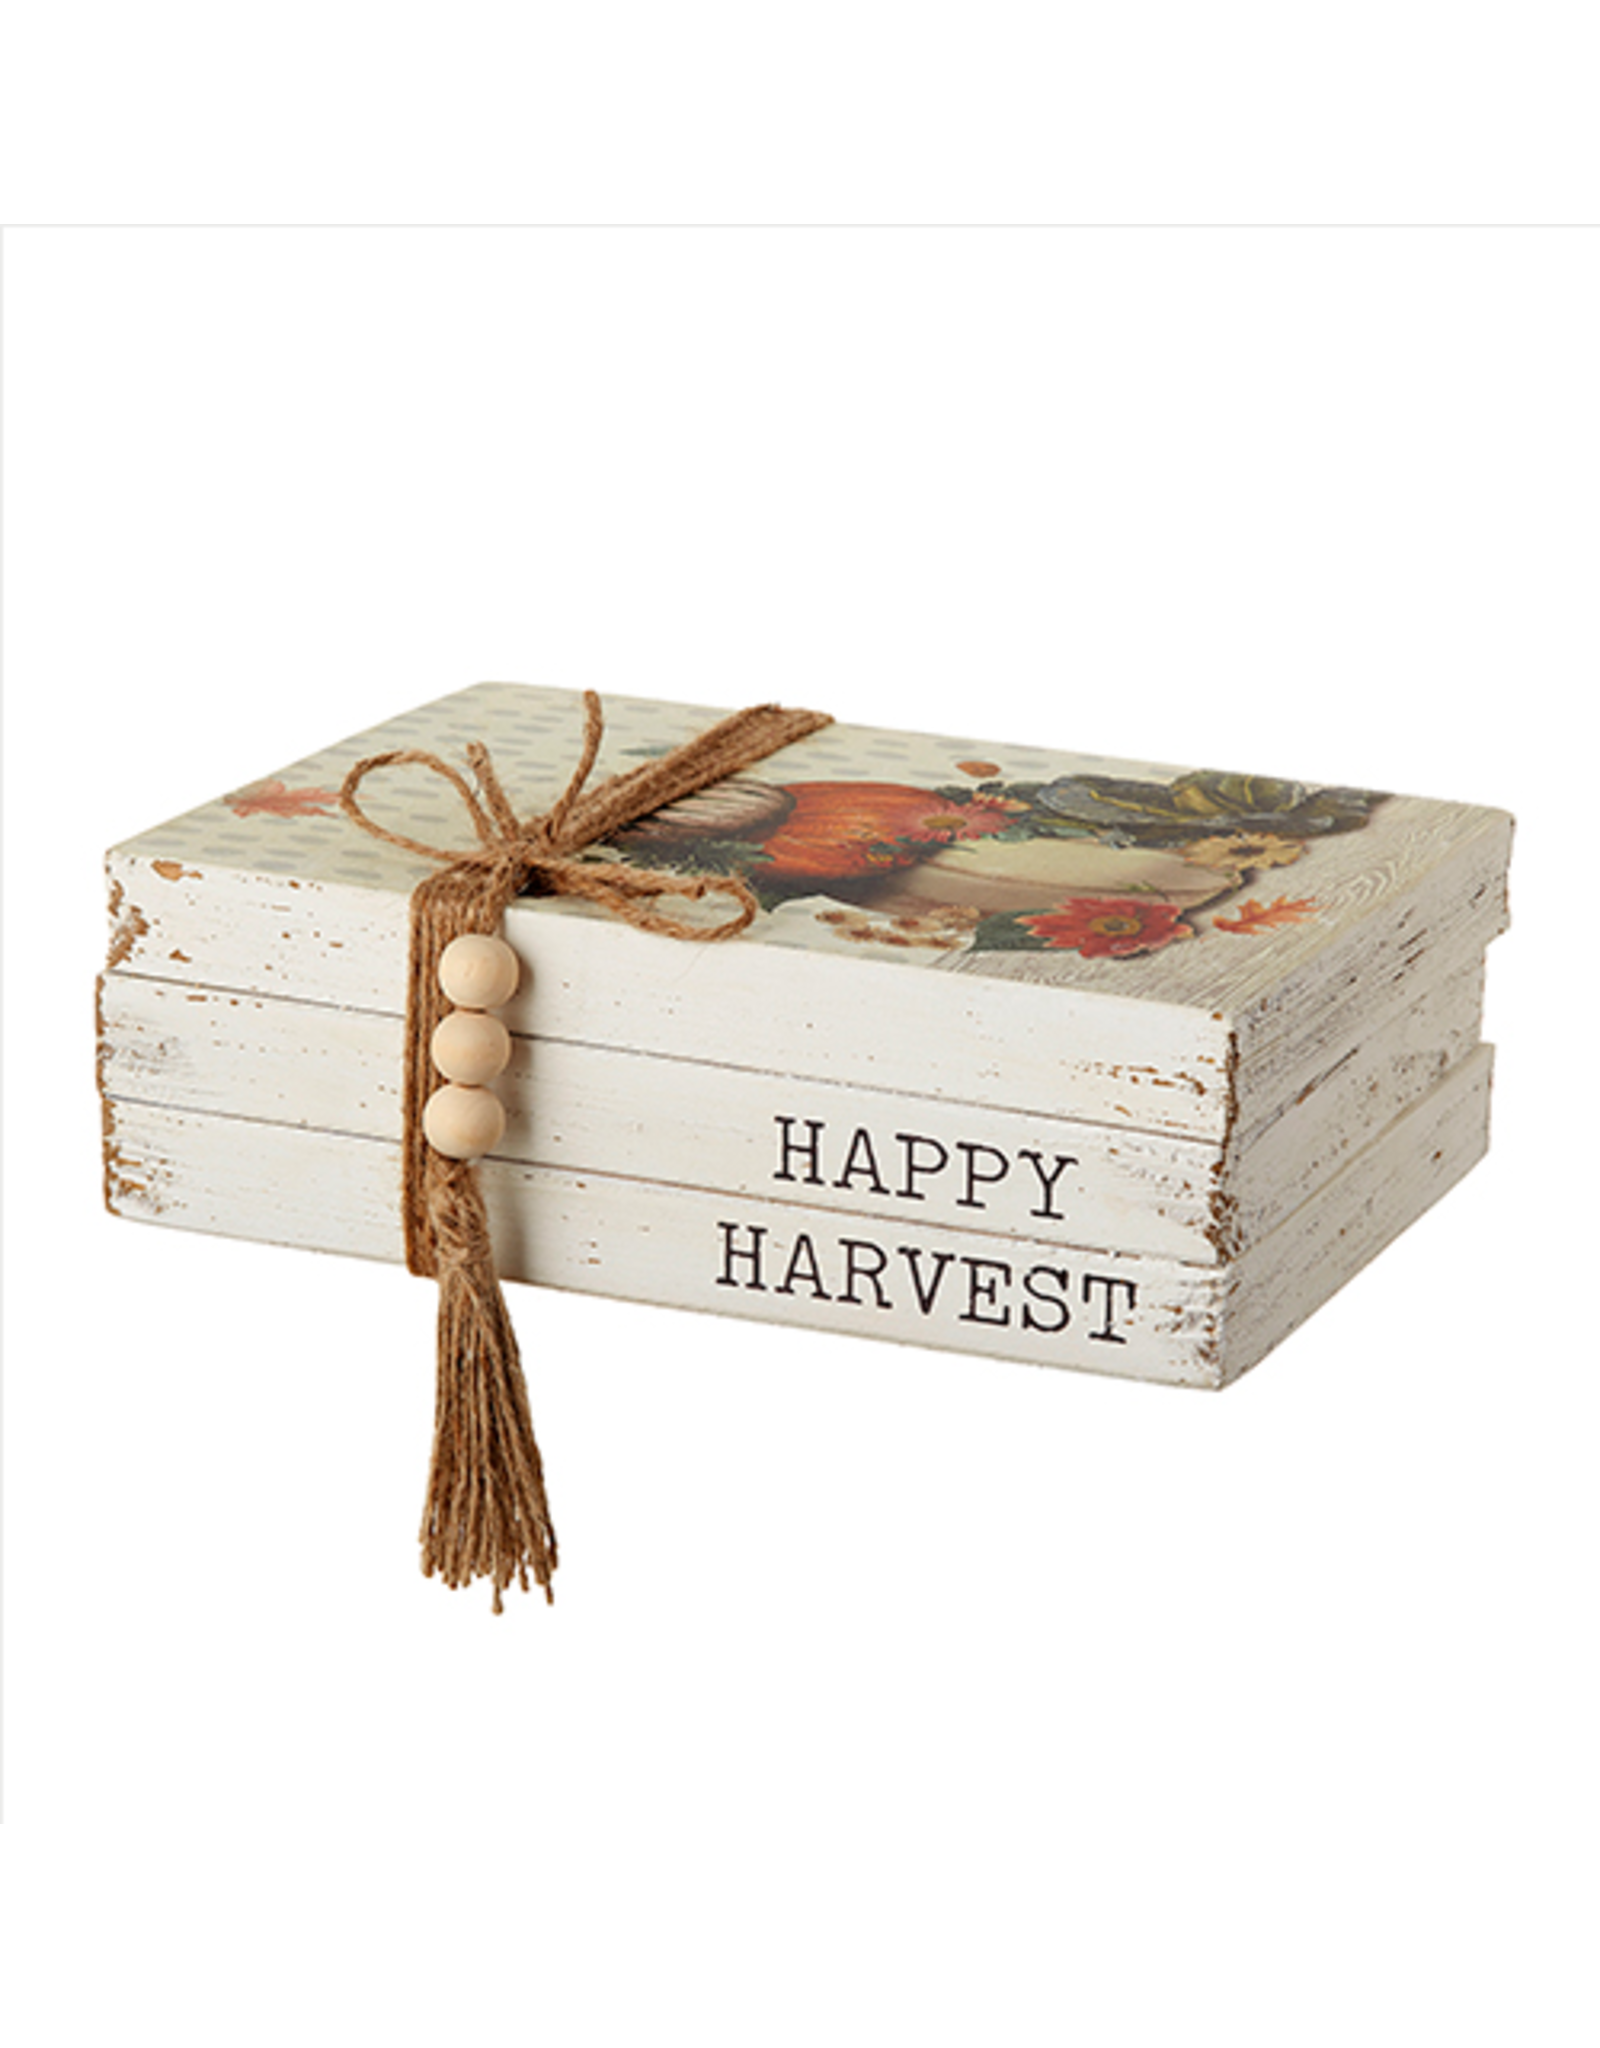 12.5" HAPPY HARVEST FAUX BOOK STACK